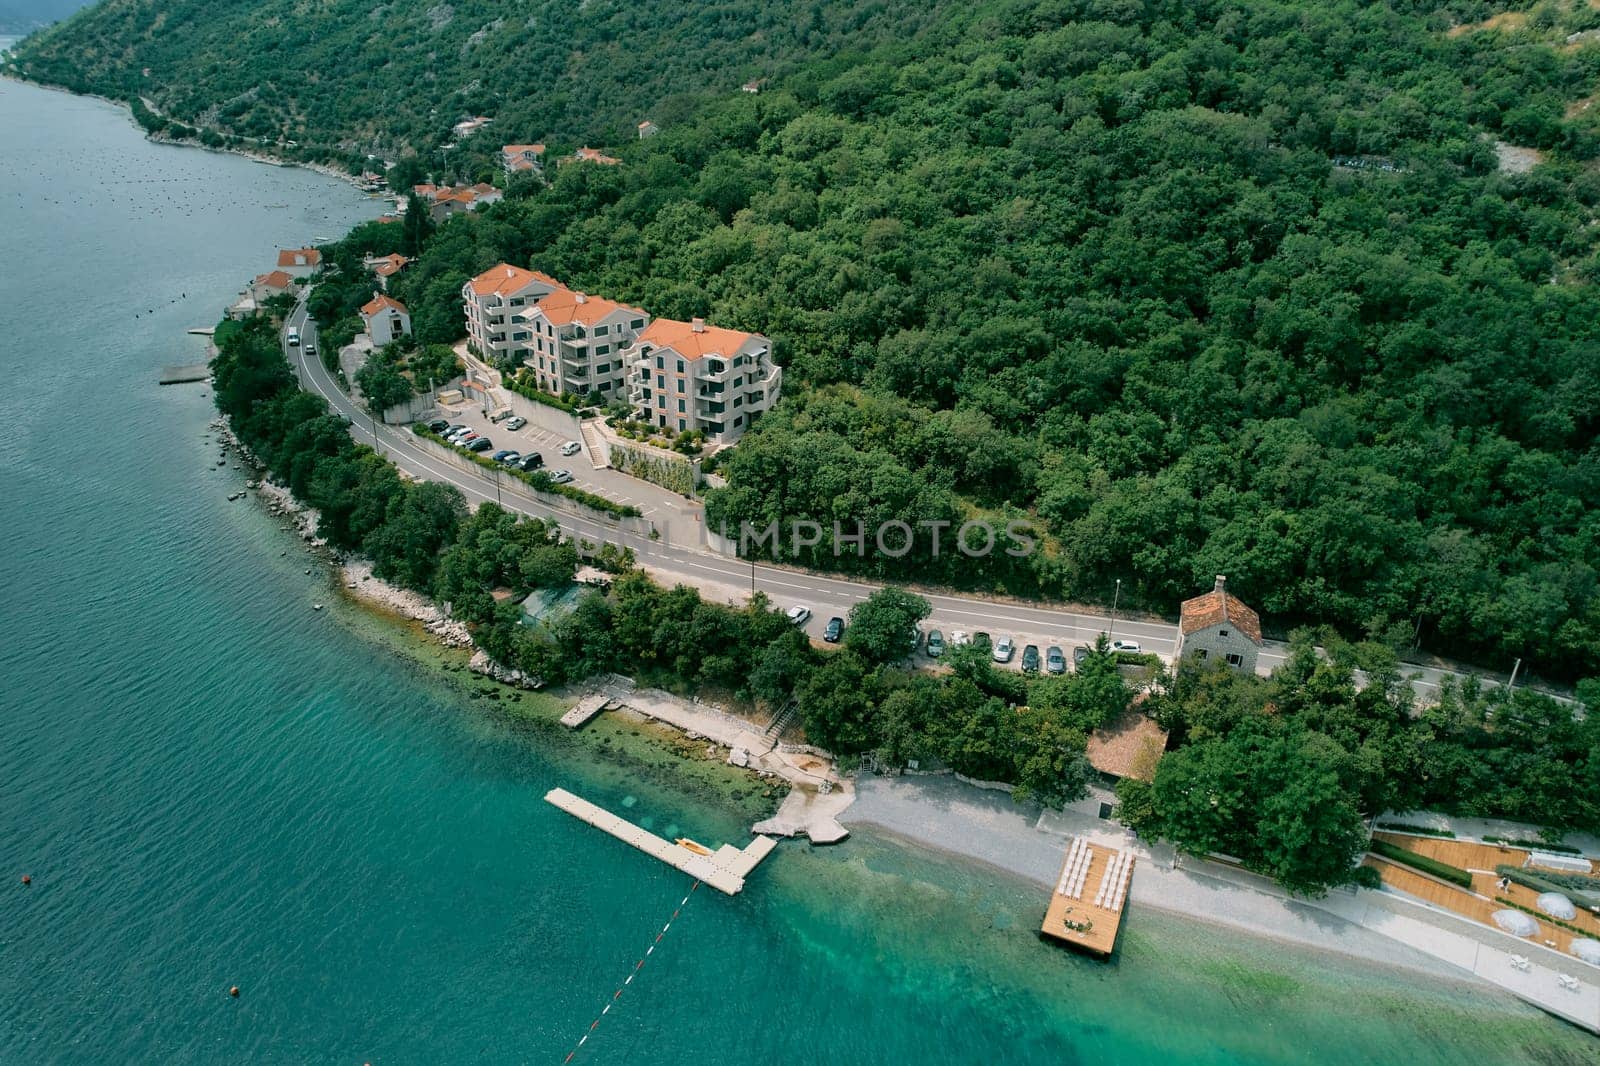 Multi-storey hotels with a private pier at the foot of green mountains on the seashore. Drone by Nadtochiy